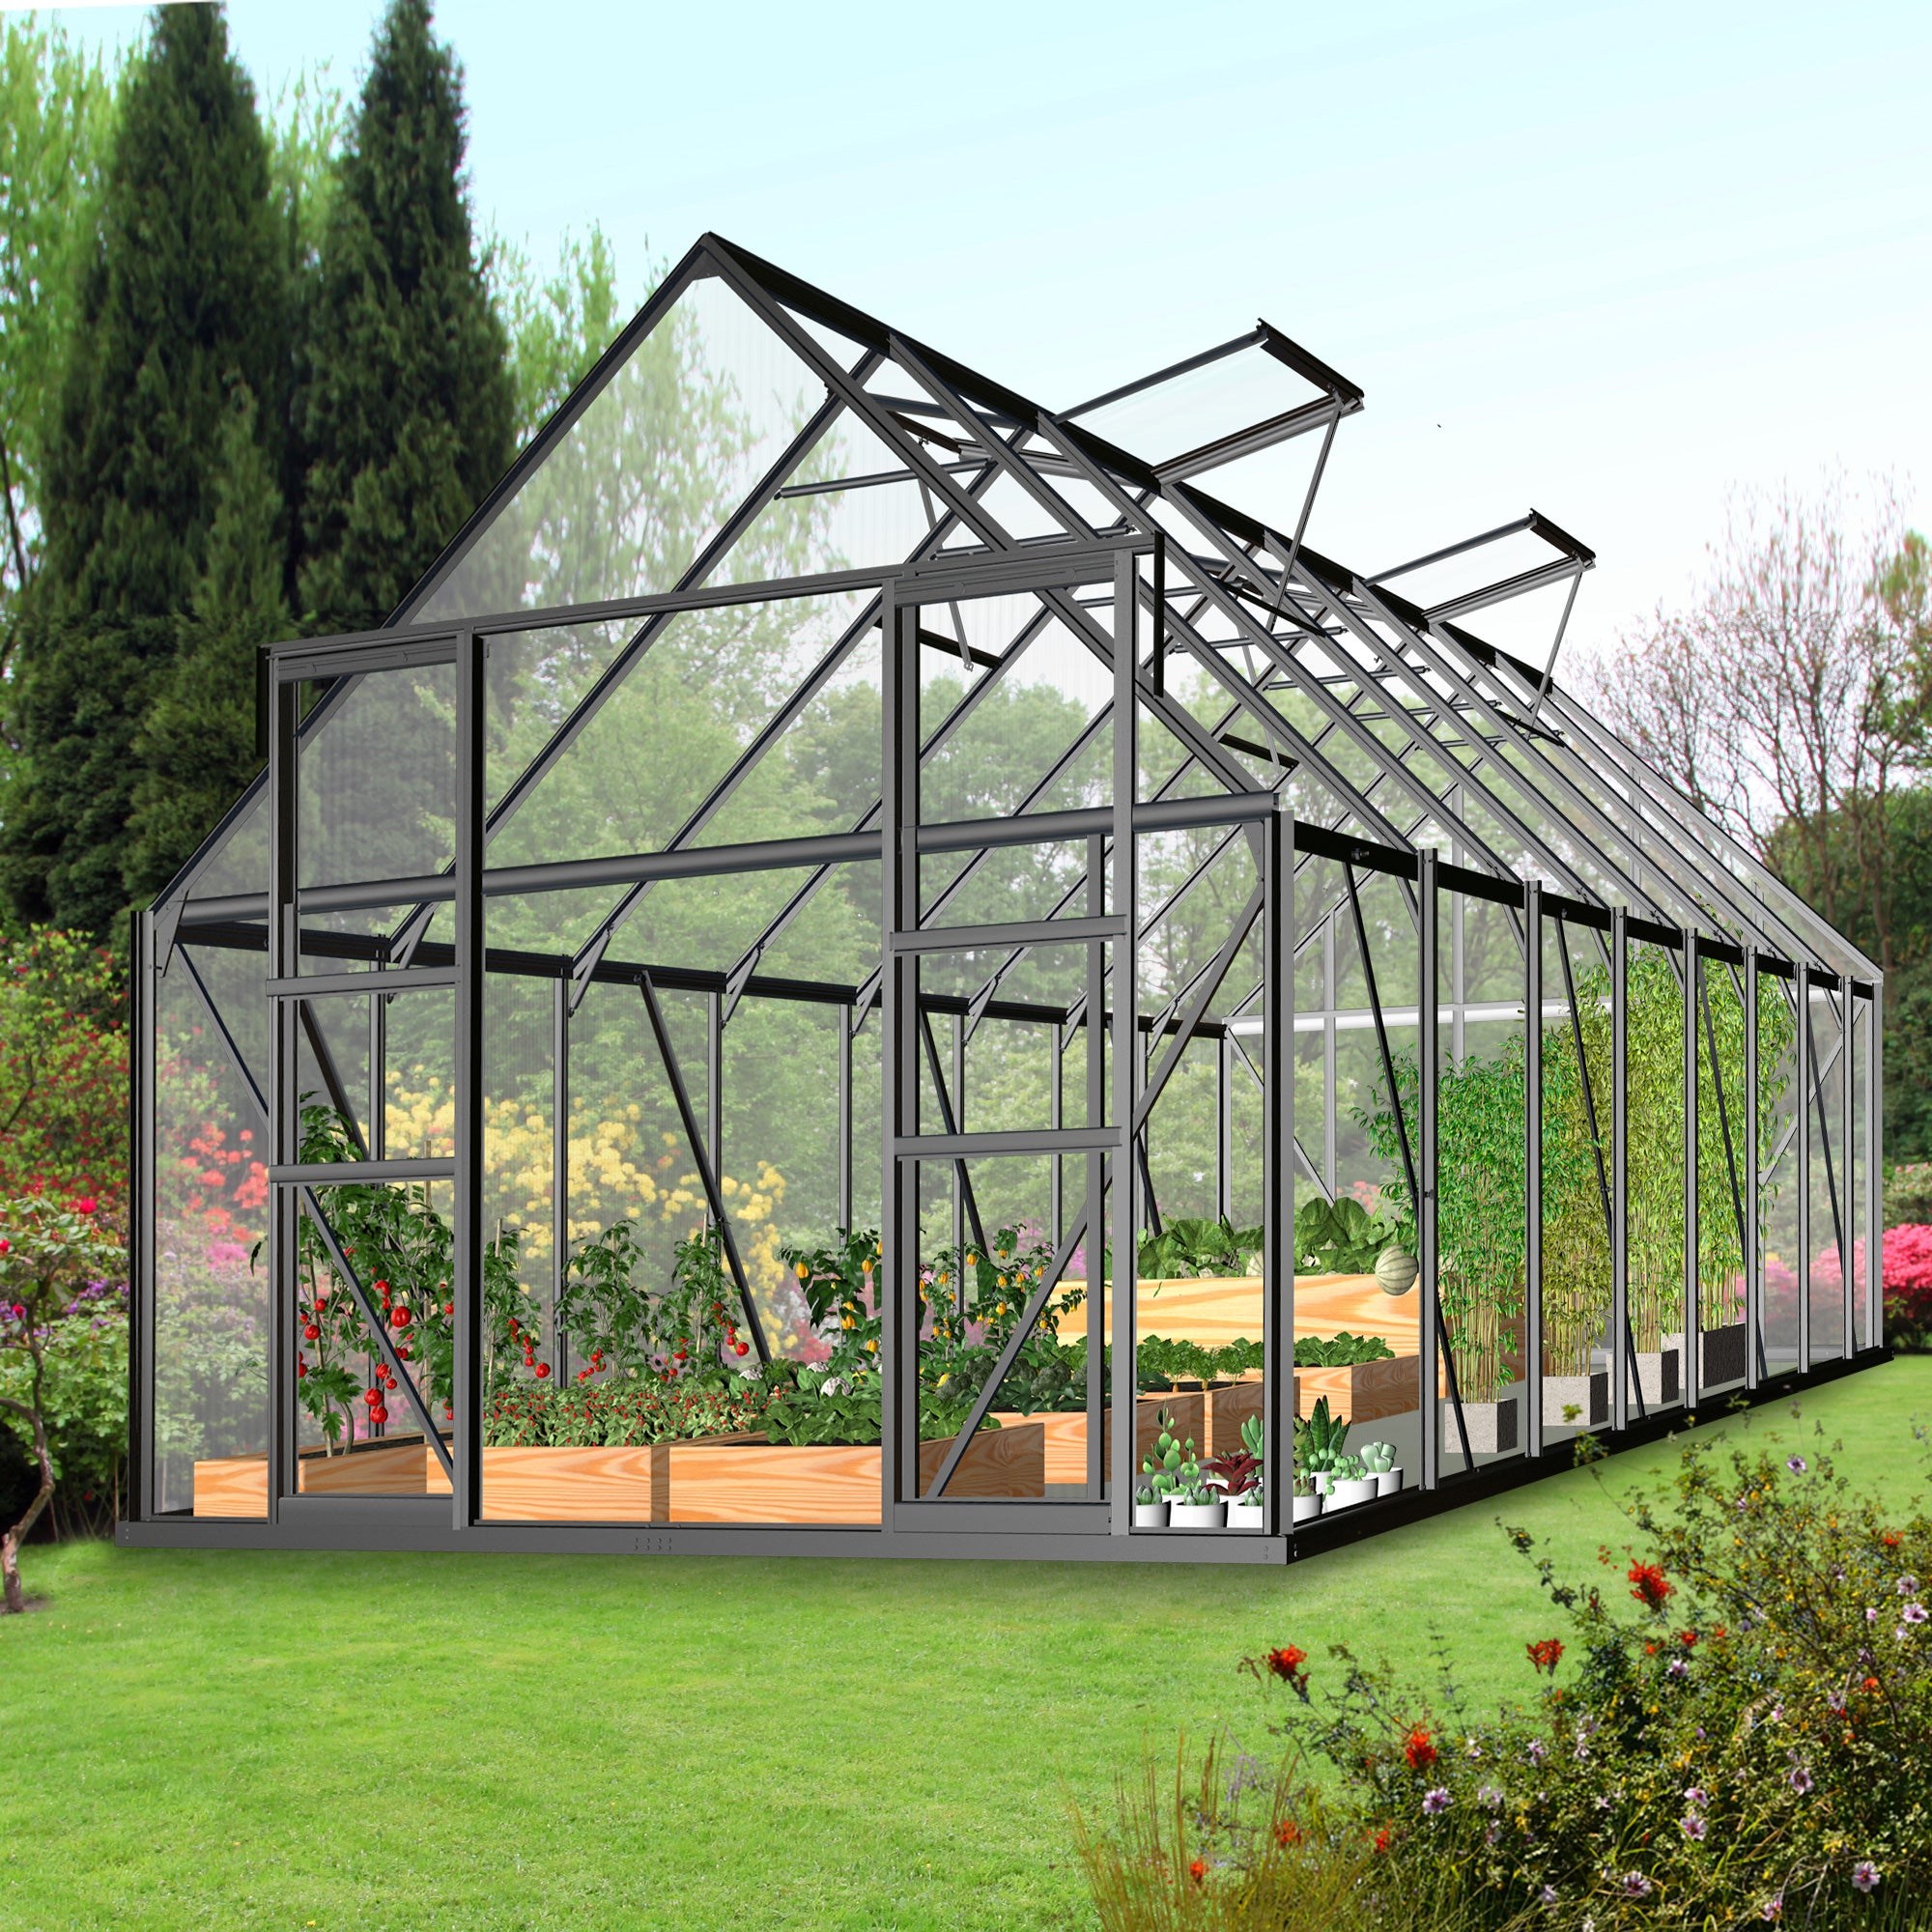 8'x12' Polycarbonate Greenhouse 2 Sliding Doors 2 Vents Window Walk-in Greenhouse for Outdoor